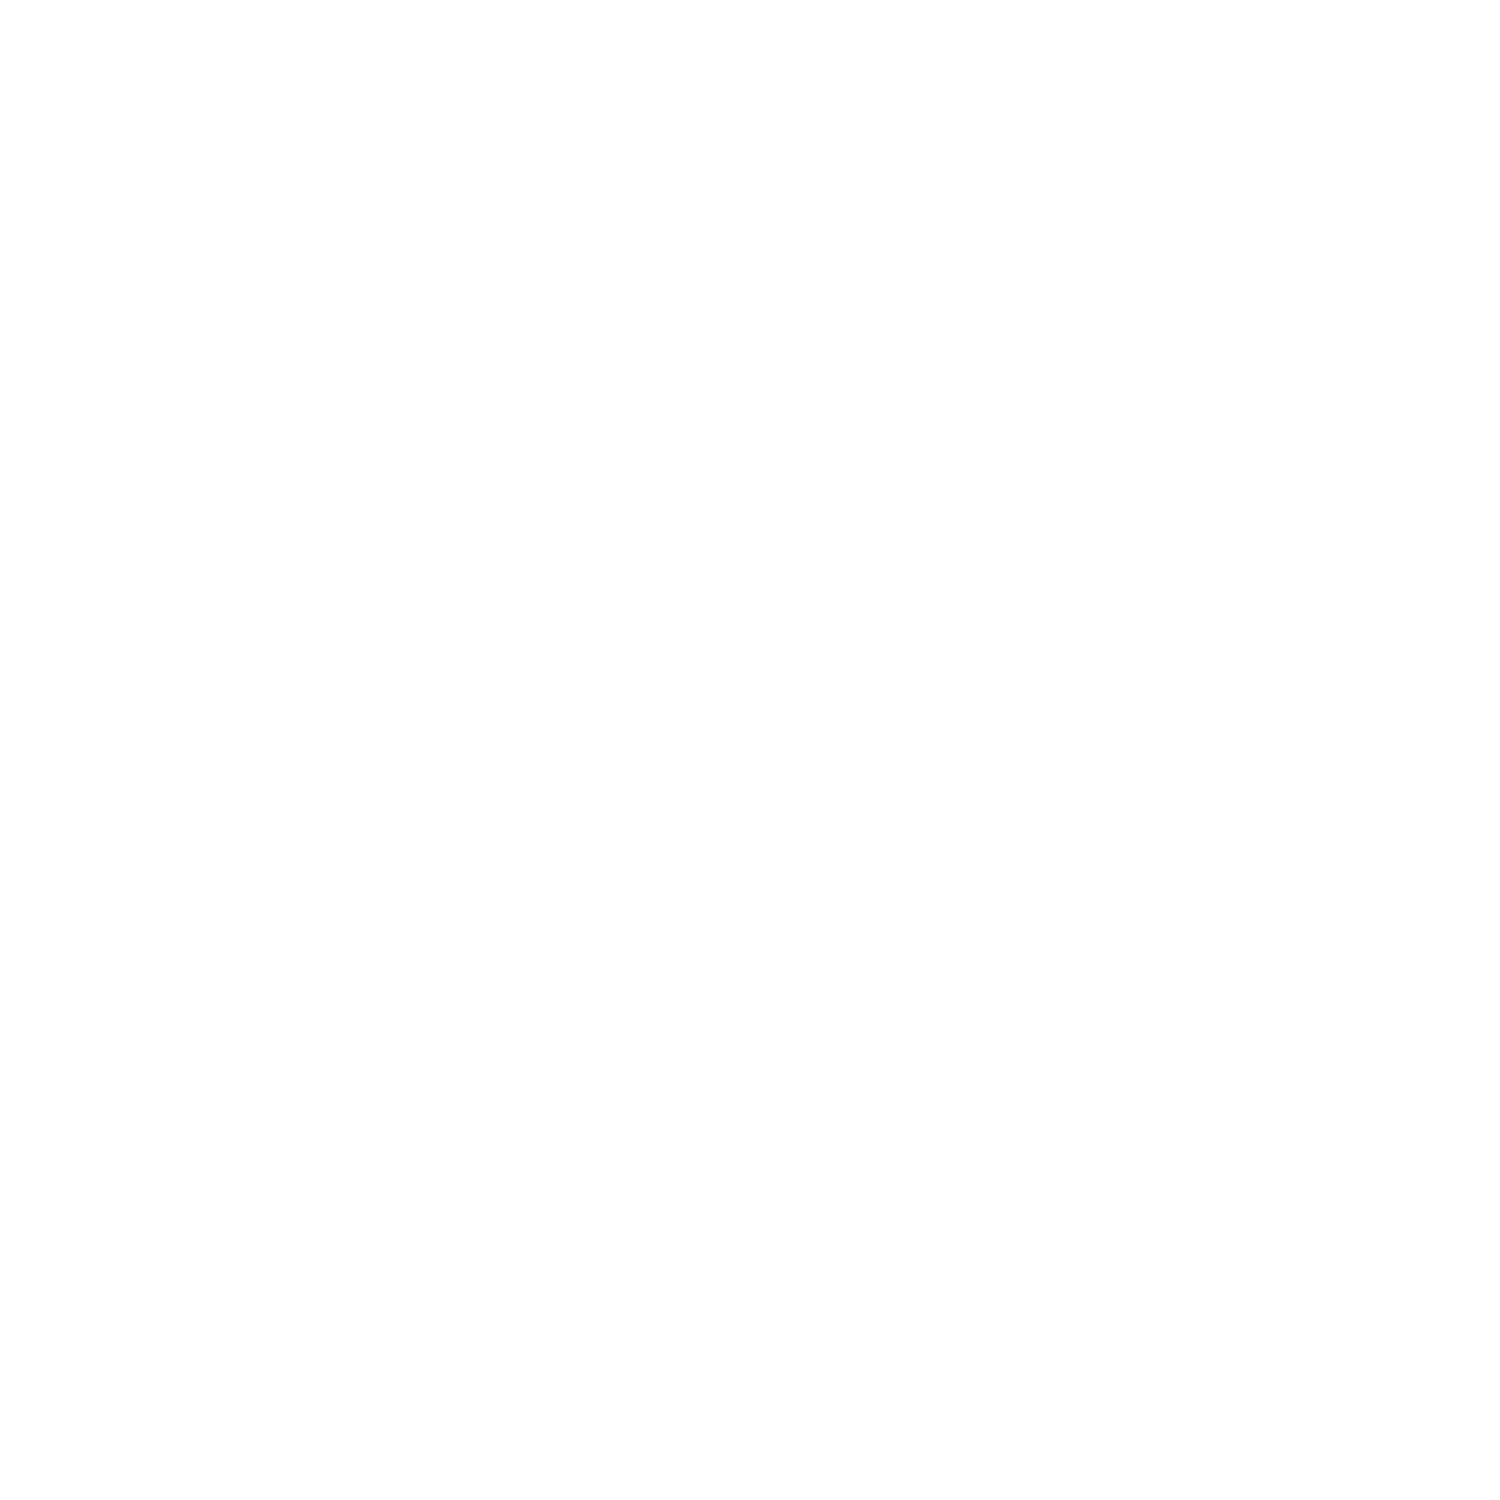 Vivant Psychotherapy and Counseling